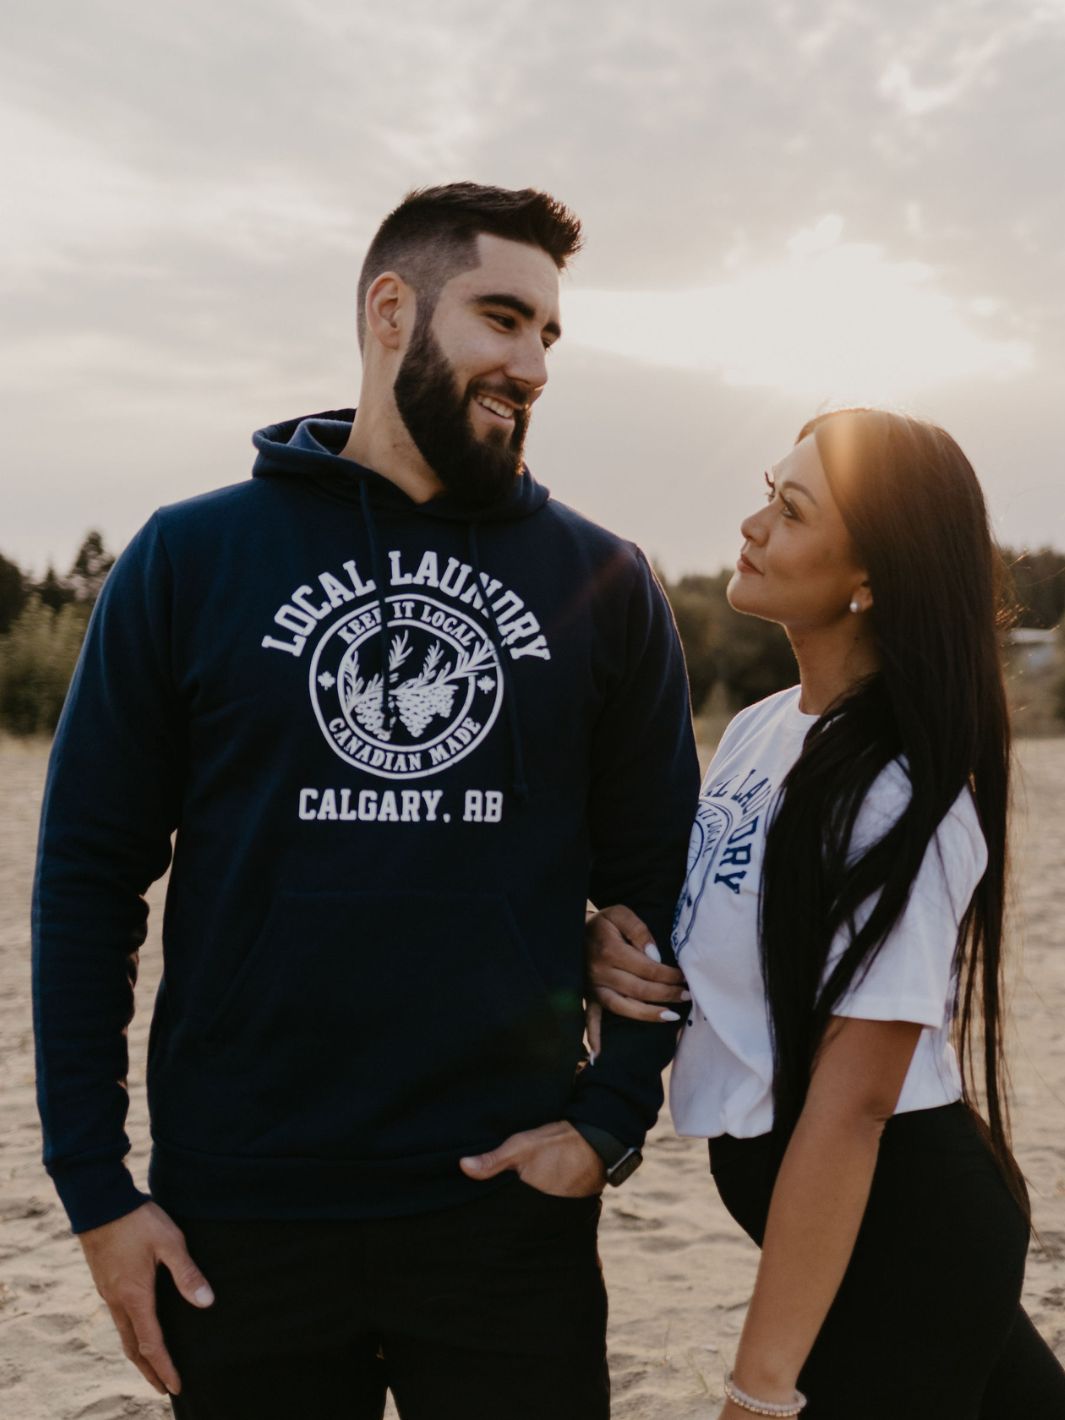 Individuals wearing their varsity line clothing by Local Laundry. One individual is wearing the Varsity Hoodie in Navy Blue, and the other wearing the white varsity t-shirt.